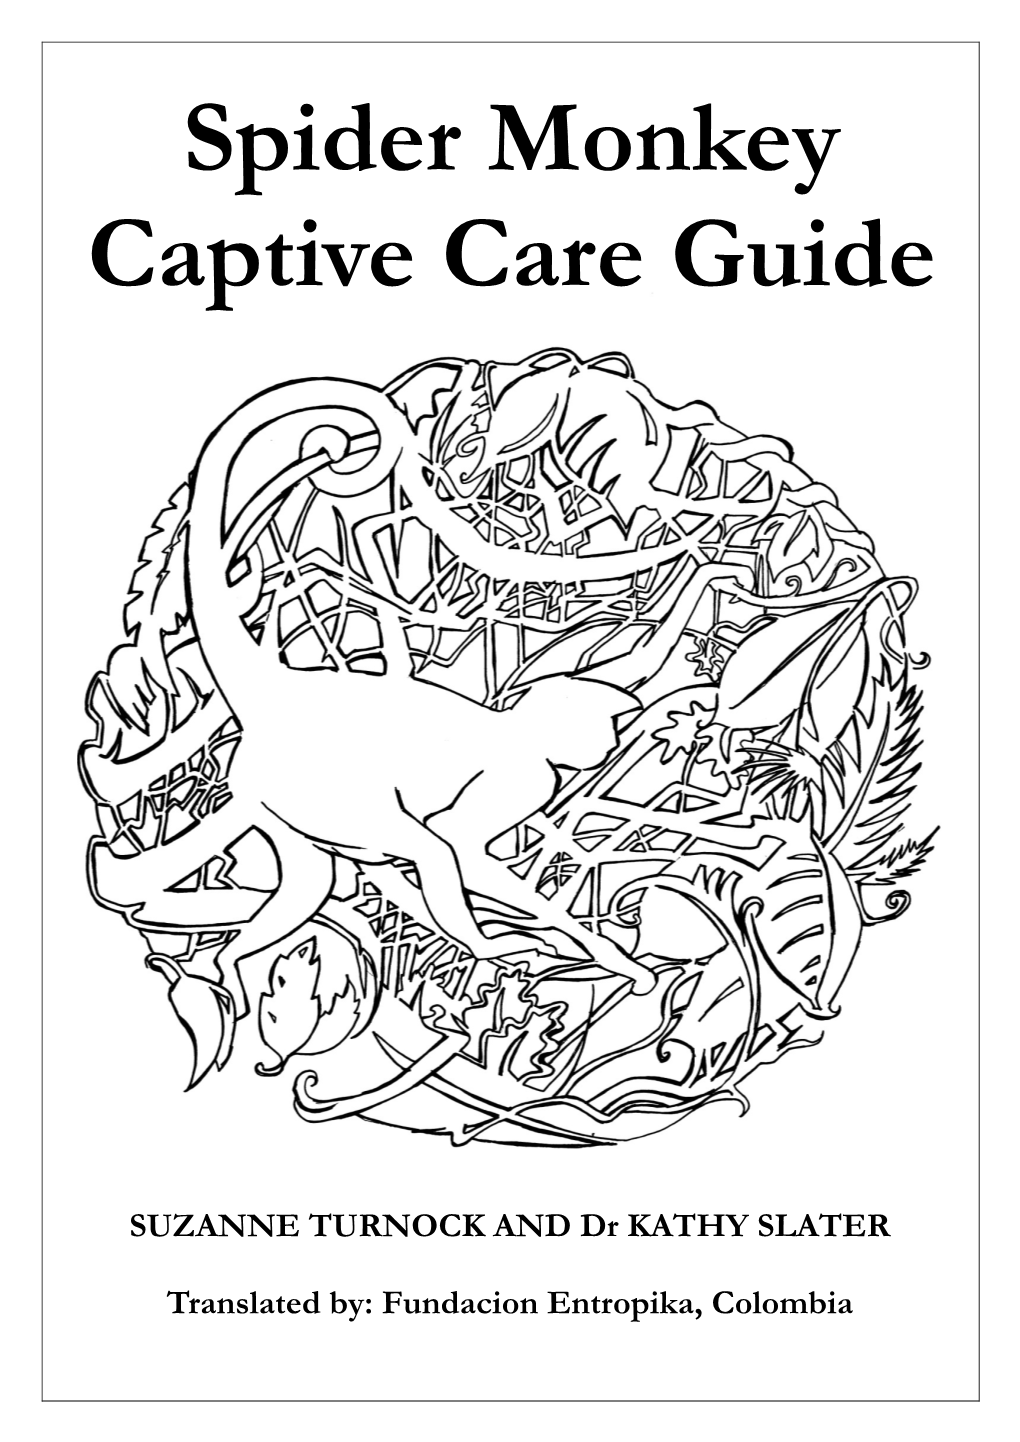 Spider Monkey Captive Care Guide